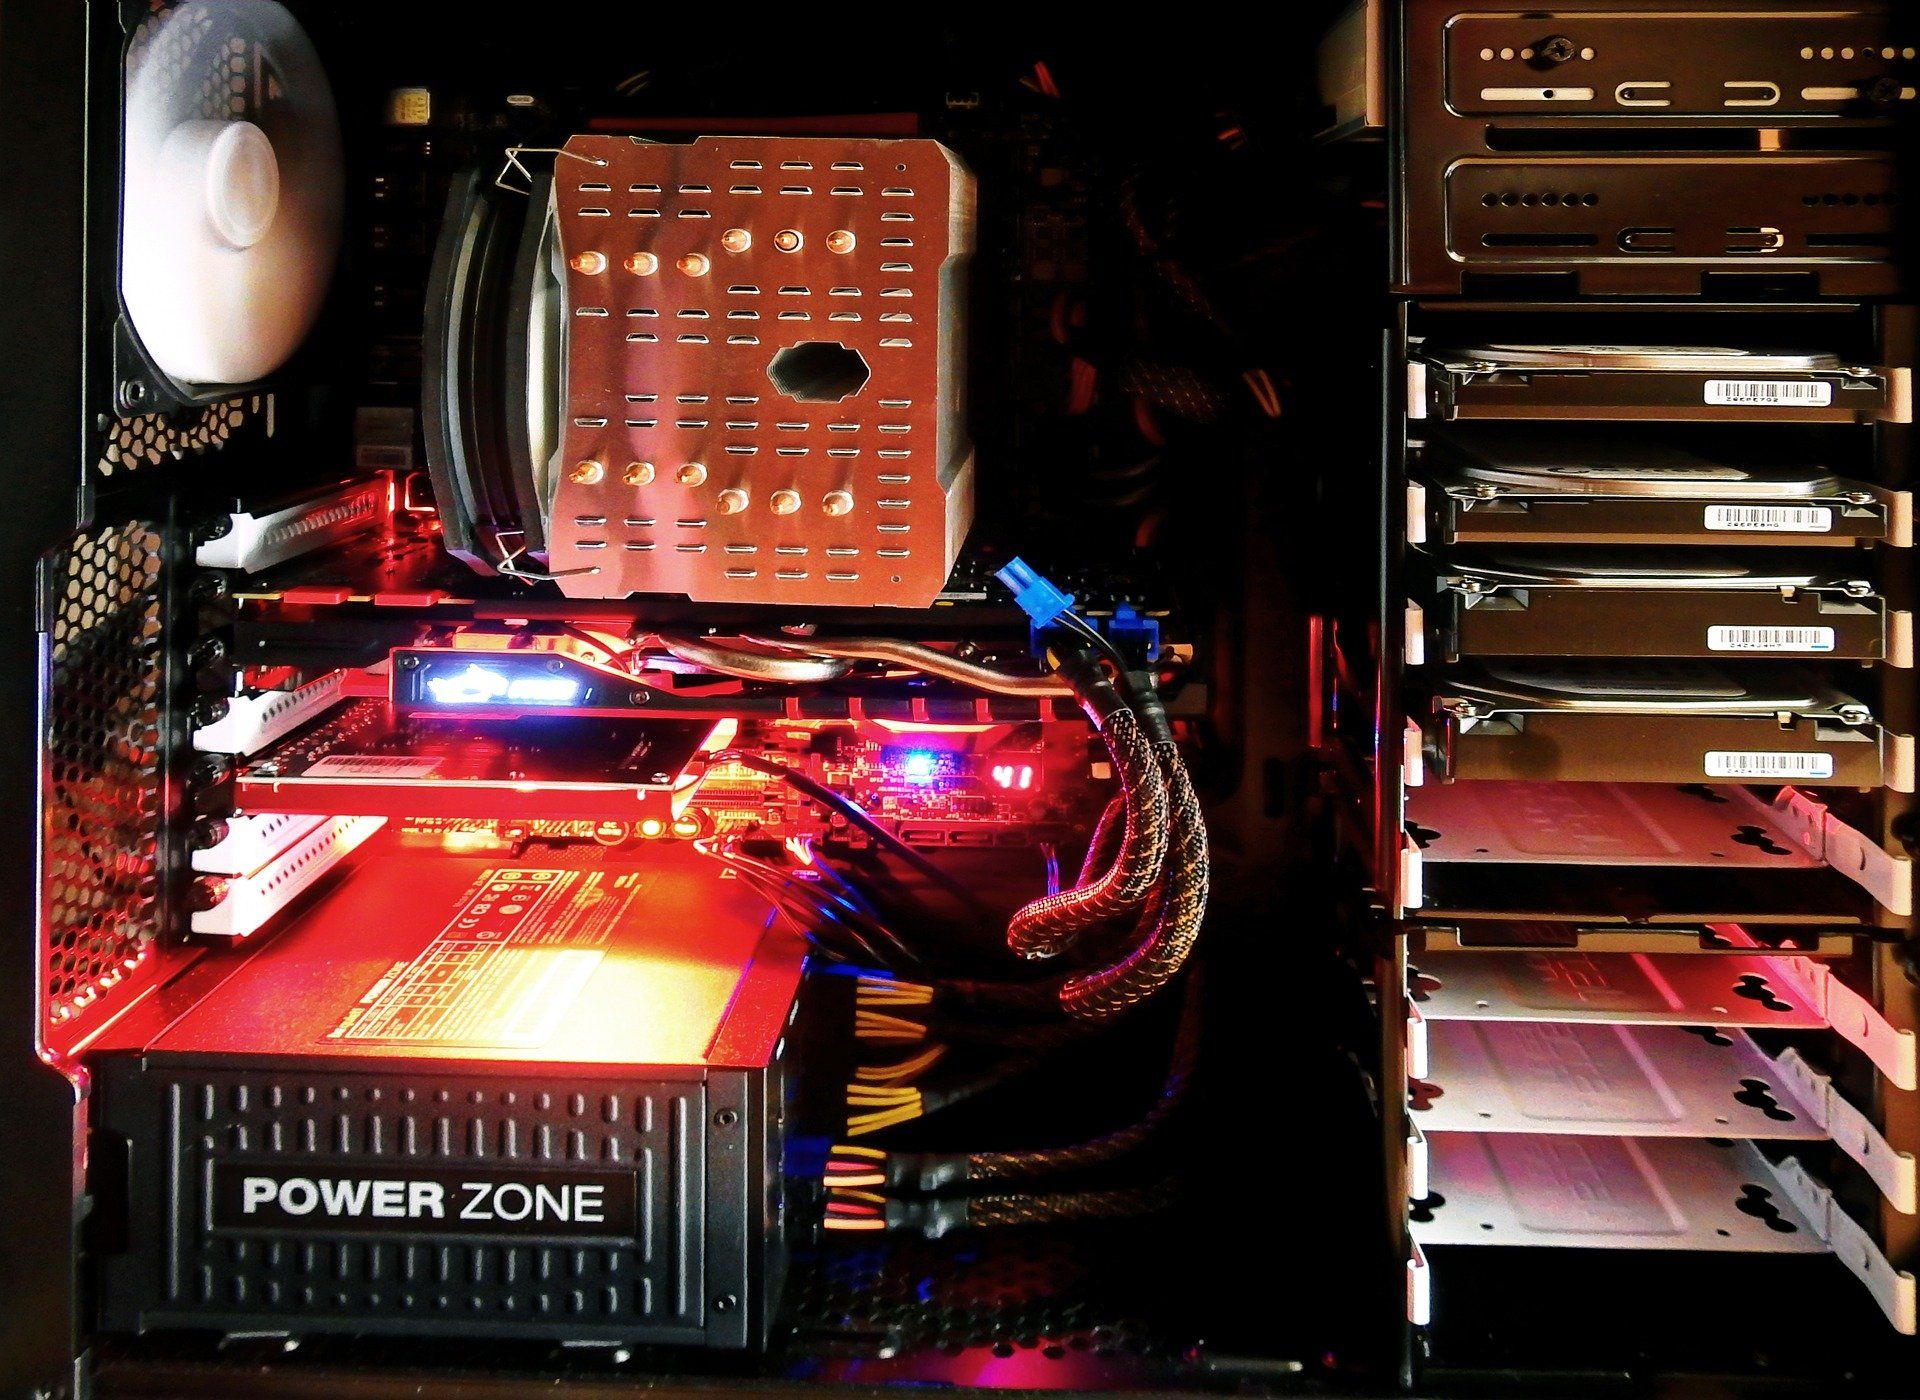 Gaming rig with several HDDs stacked vertically.